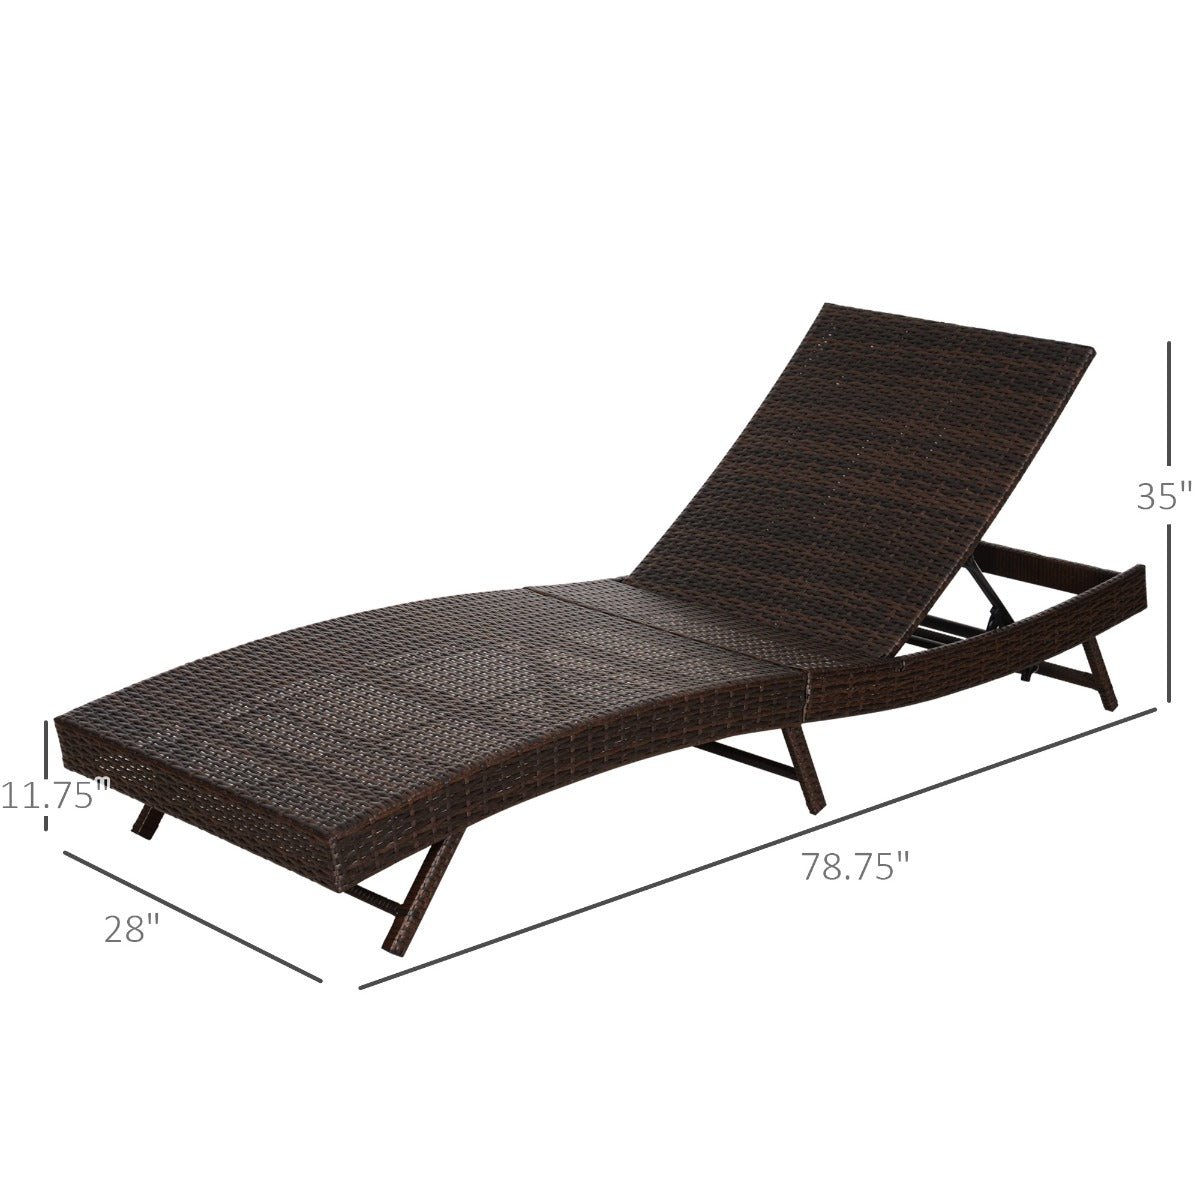 Outdoor and Garden-Wicker Chaise Patio Lounge Chair, 5 Position Adjustable Backrest and Cushions Outdoor PE Rattan Wicker Lounge Chair - Black / Cream - Outdoor Style Company